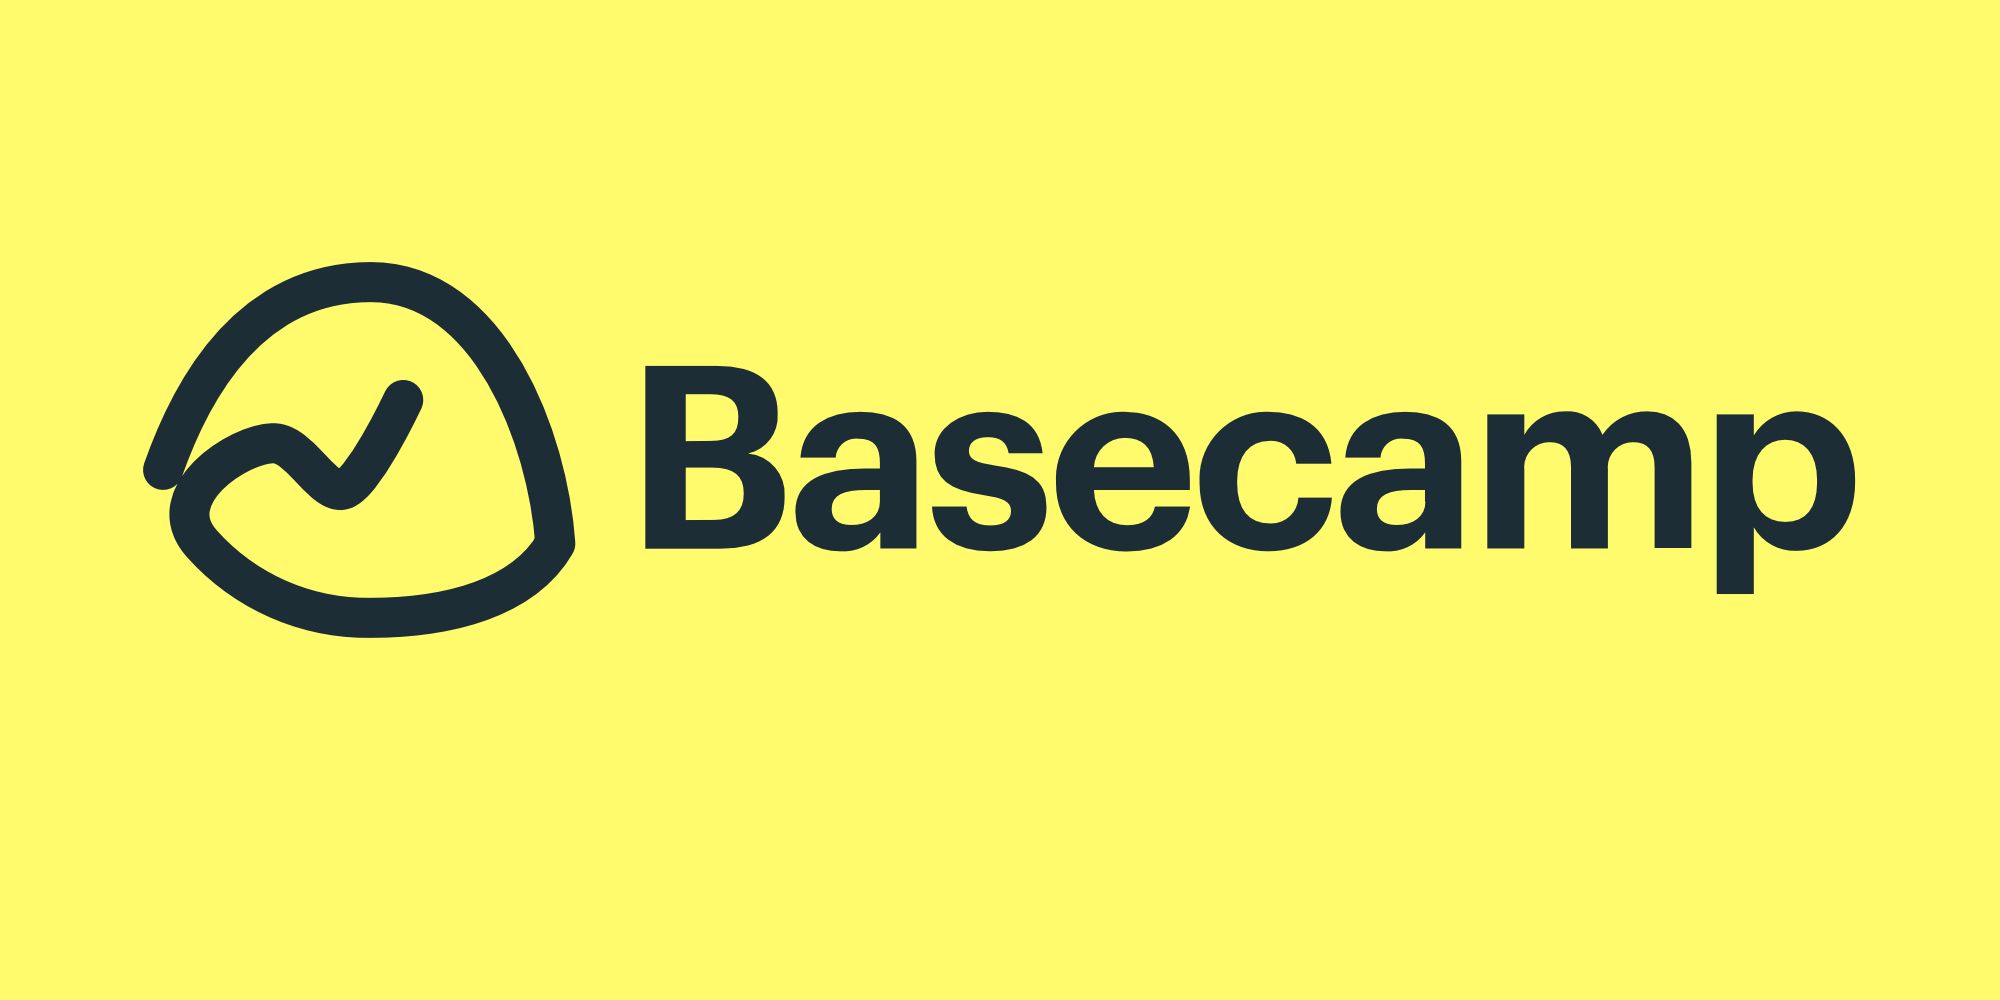 Basecamp logo on a yellow background